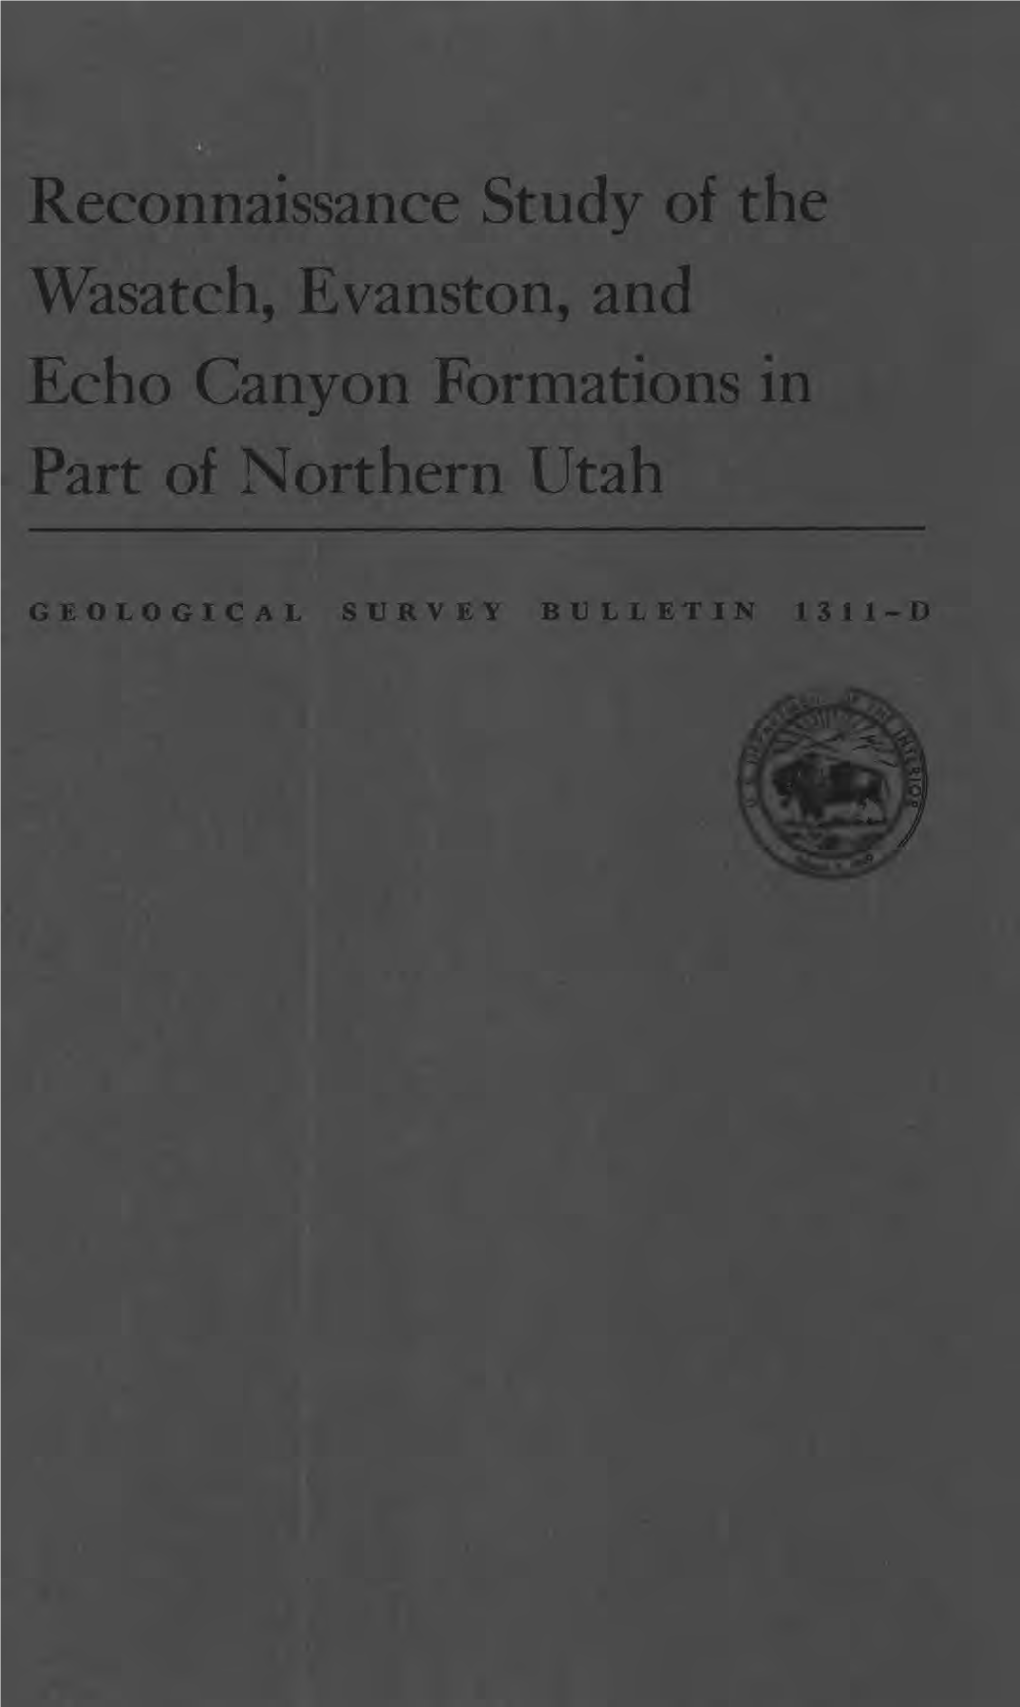 Reconnaissance Study of the Wasatch, Evanston, and Echo Canyon Formations in Part of Northern Utah